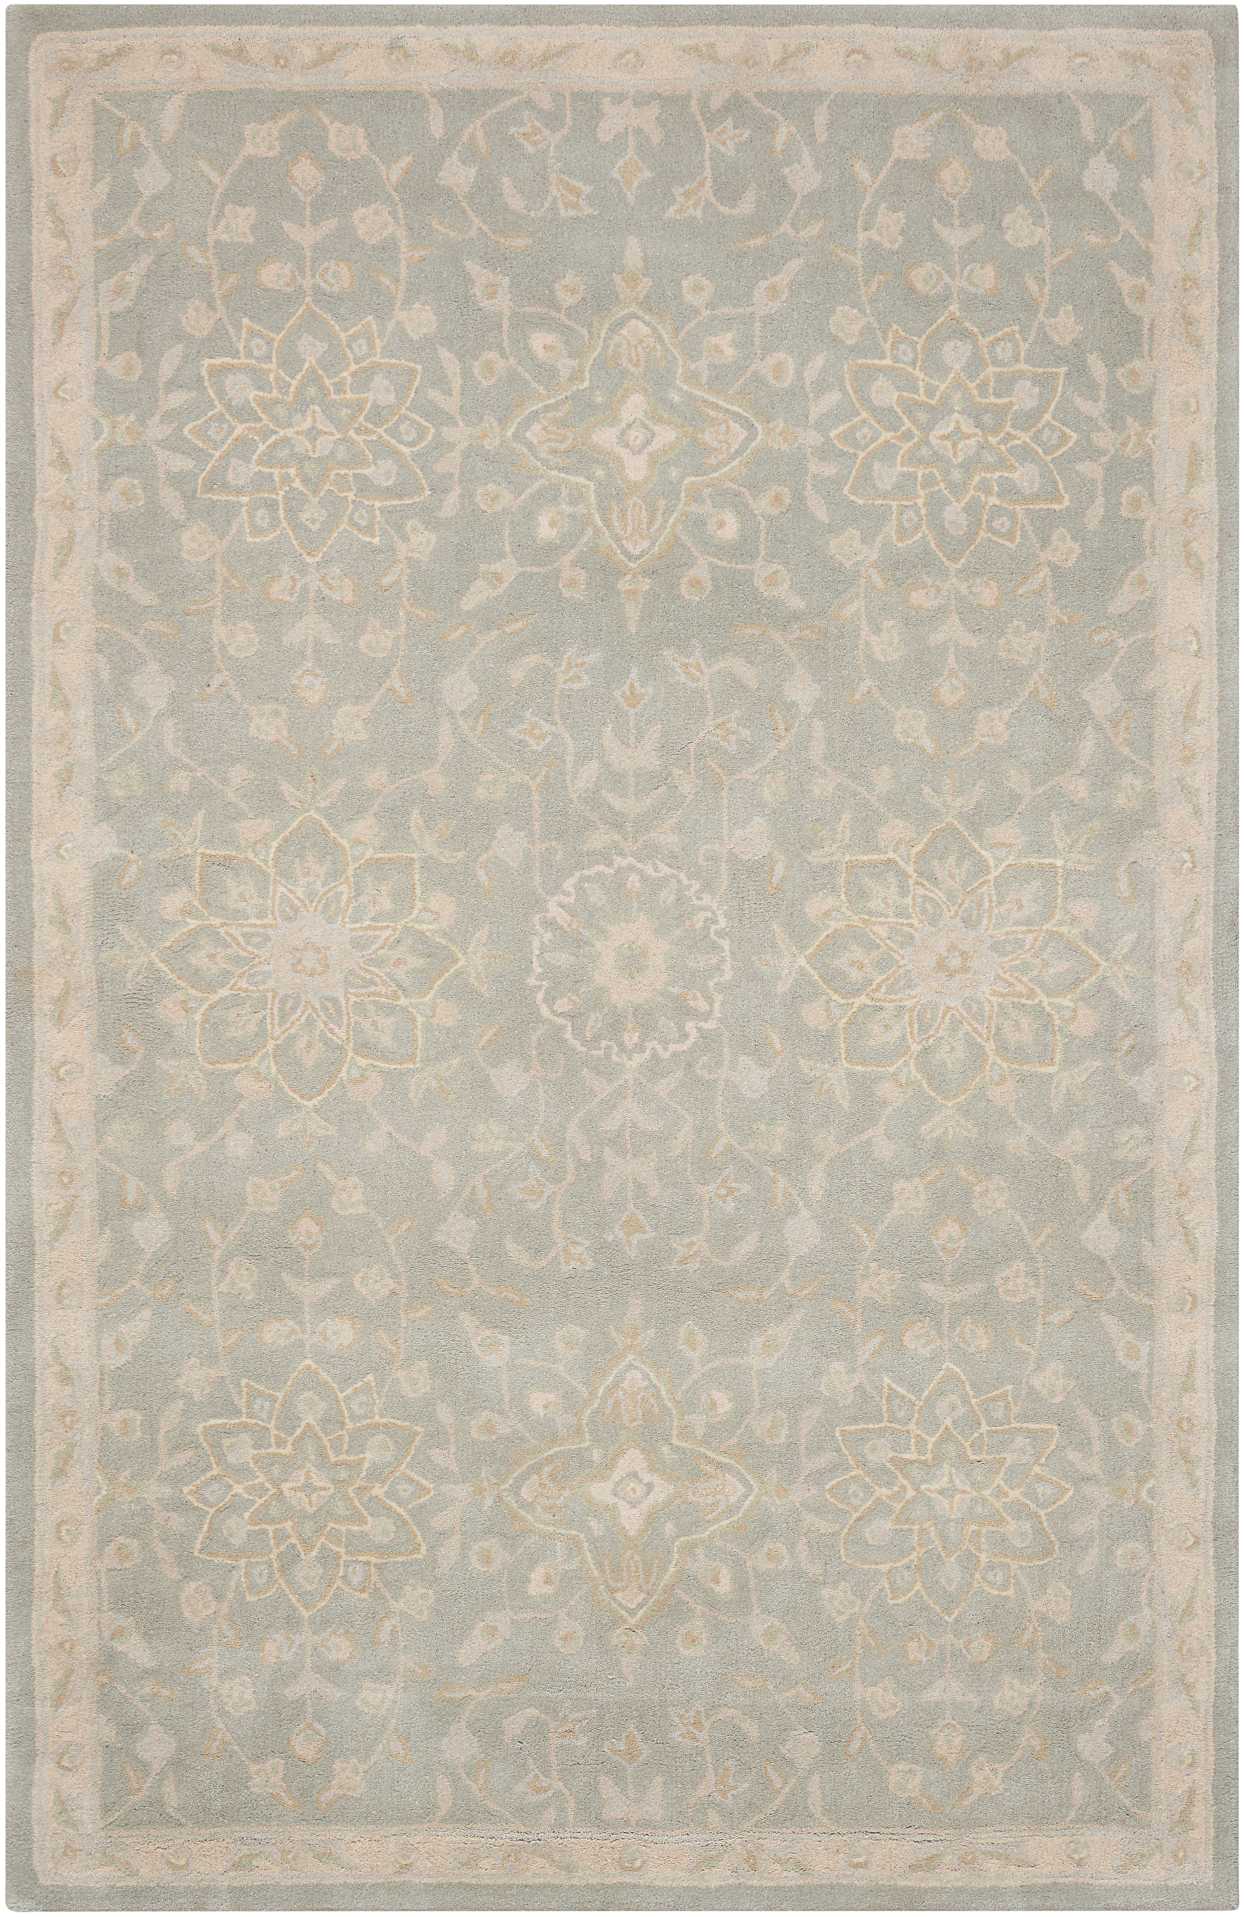 Kathy Ireland Royal Serenity St. James Cloud Area Rug by Nourison